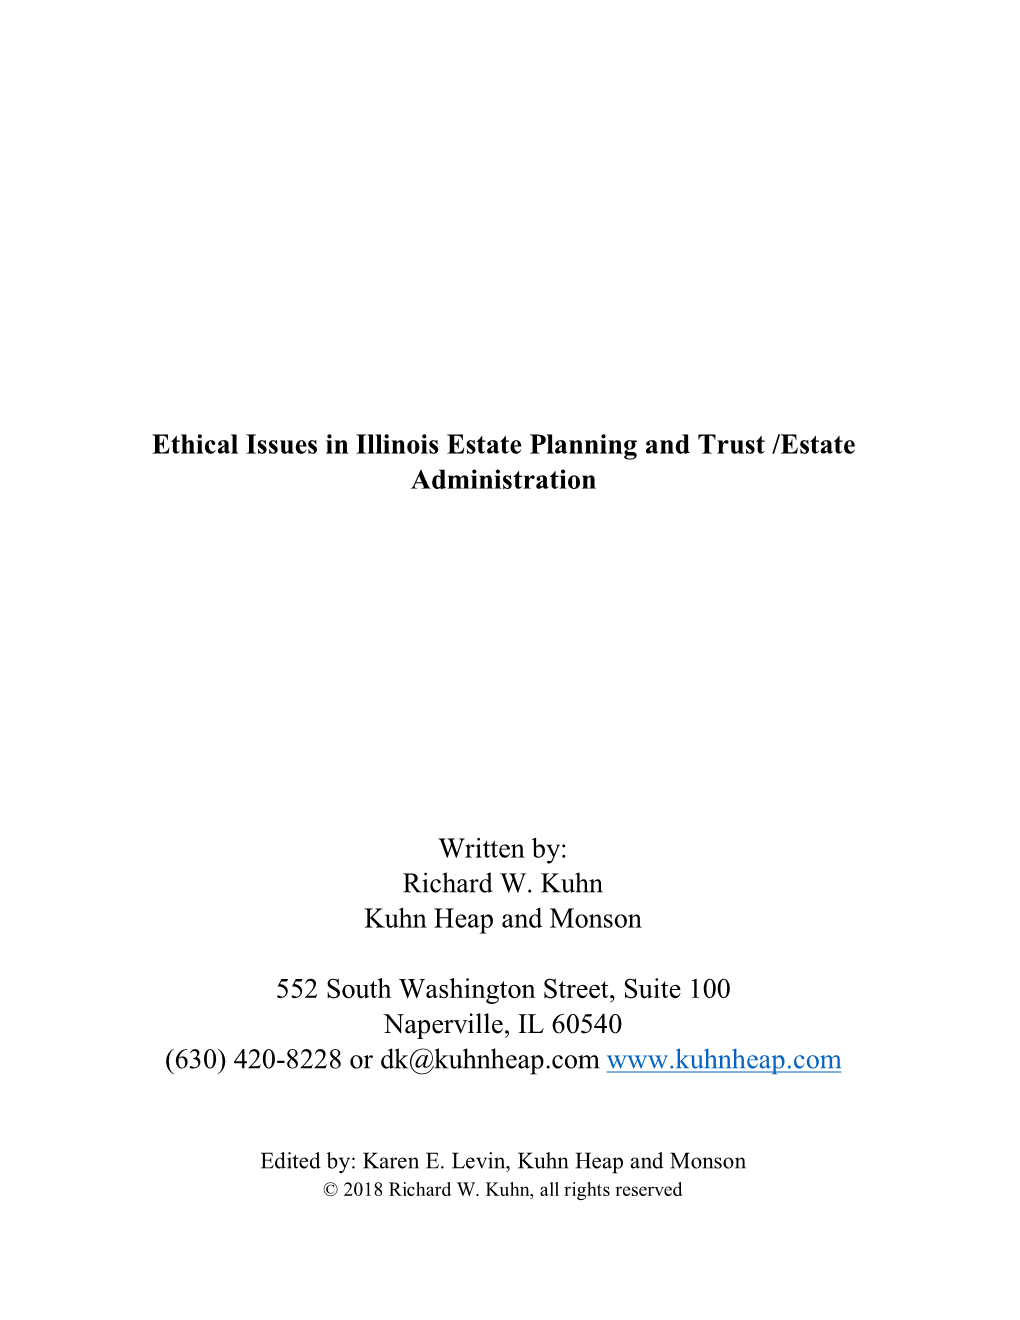 Ethical Issues in Illinois Estate Planning and Trust /Estate Administration